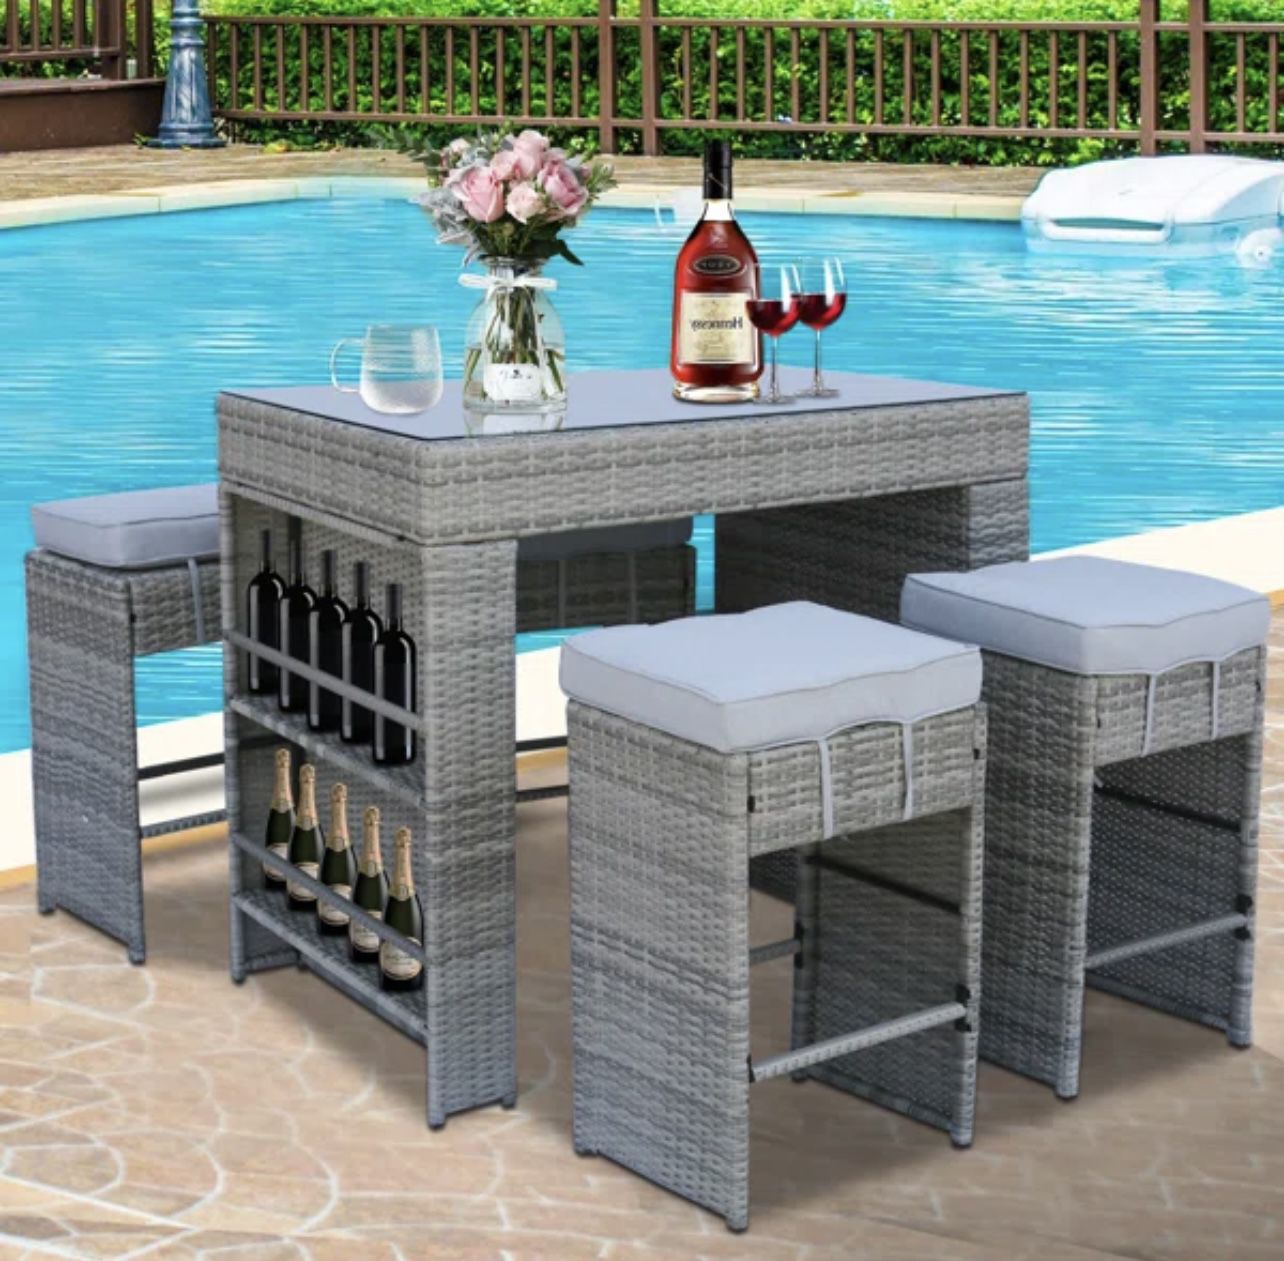 Bar Dining Table Set New in Original Packaging 5 Piece Premium Wicker Set Retailed For $429.99.